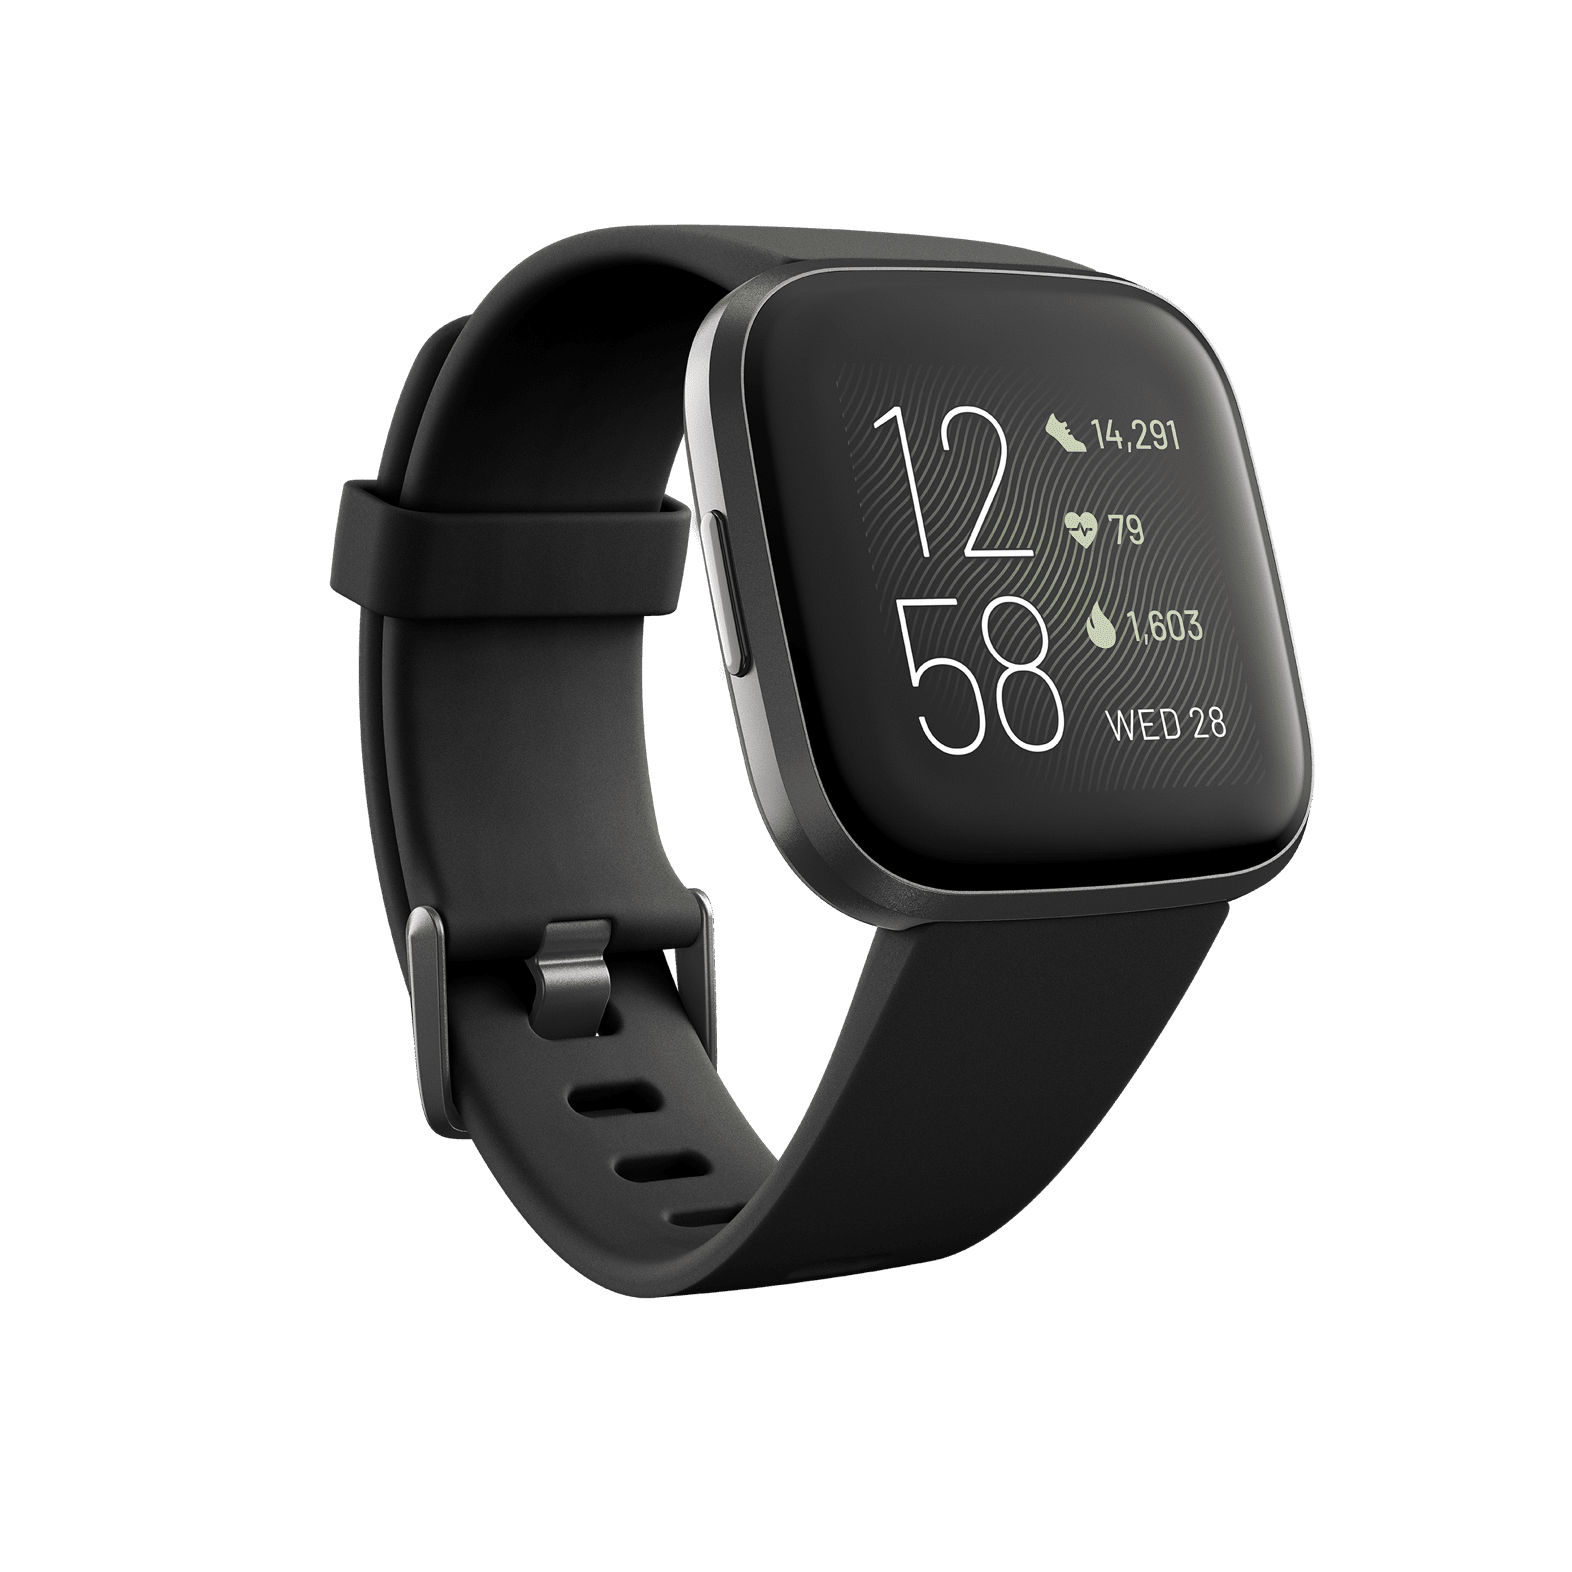 Does Fitbit accompany an Internet Browser?